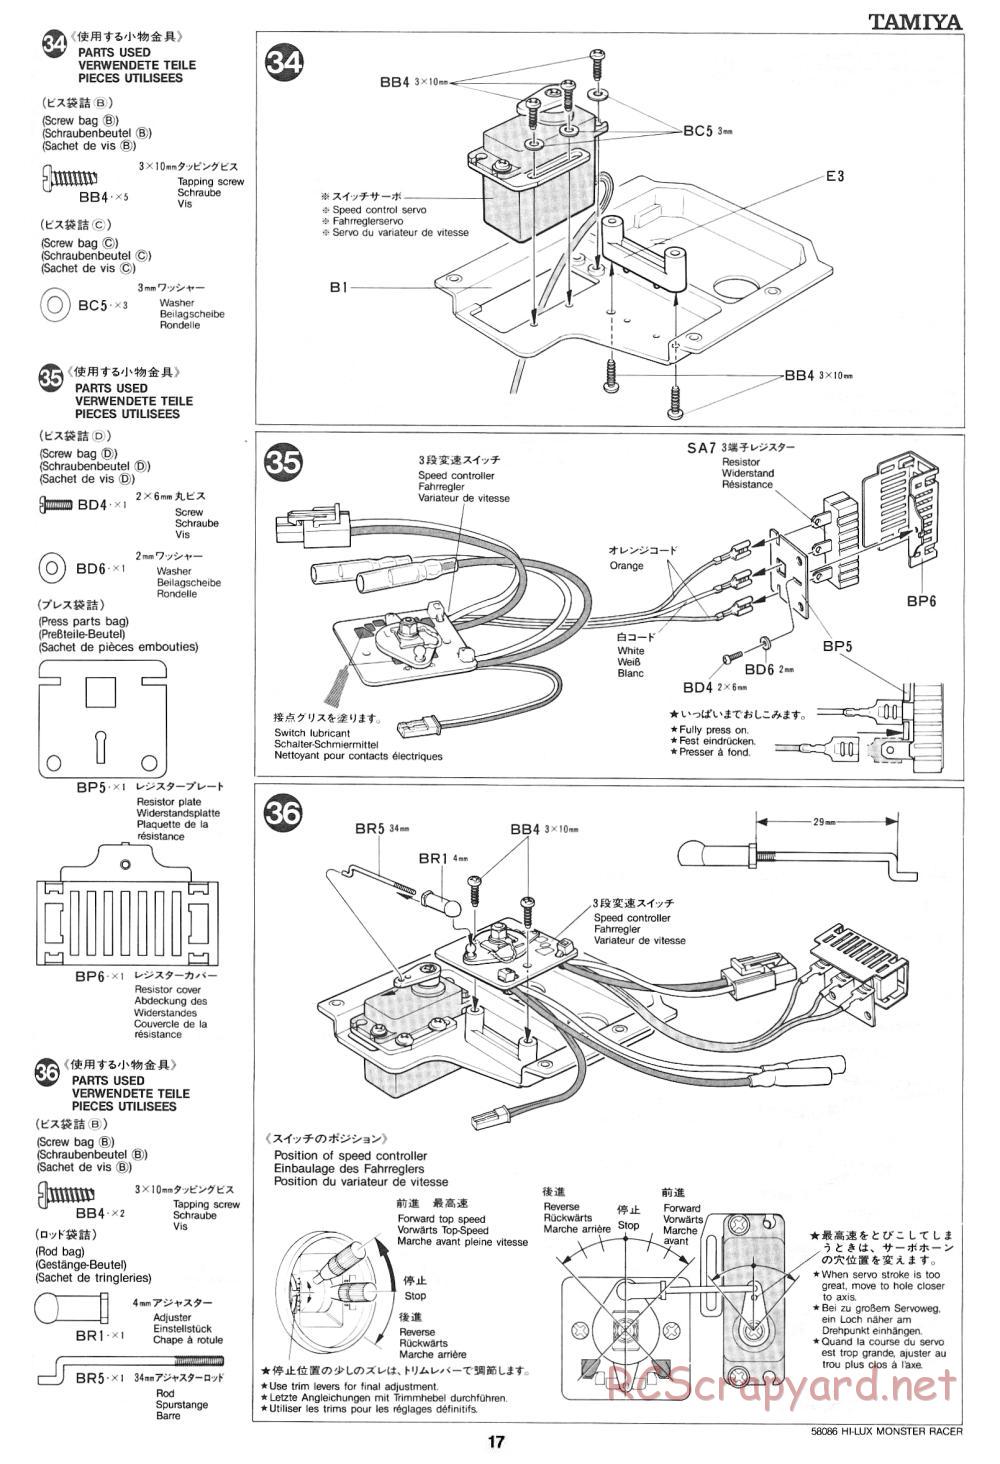 Tamiya - Toyota Hilux Monster Racer - 58086 - Manual - Page 17